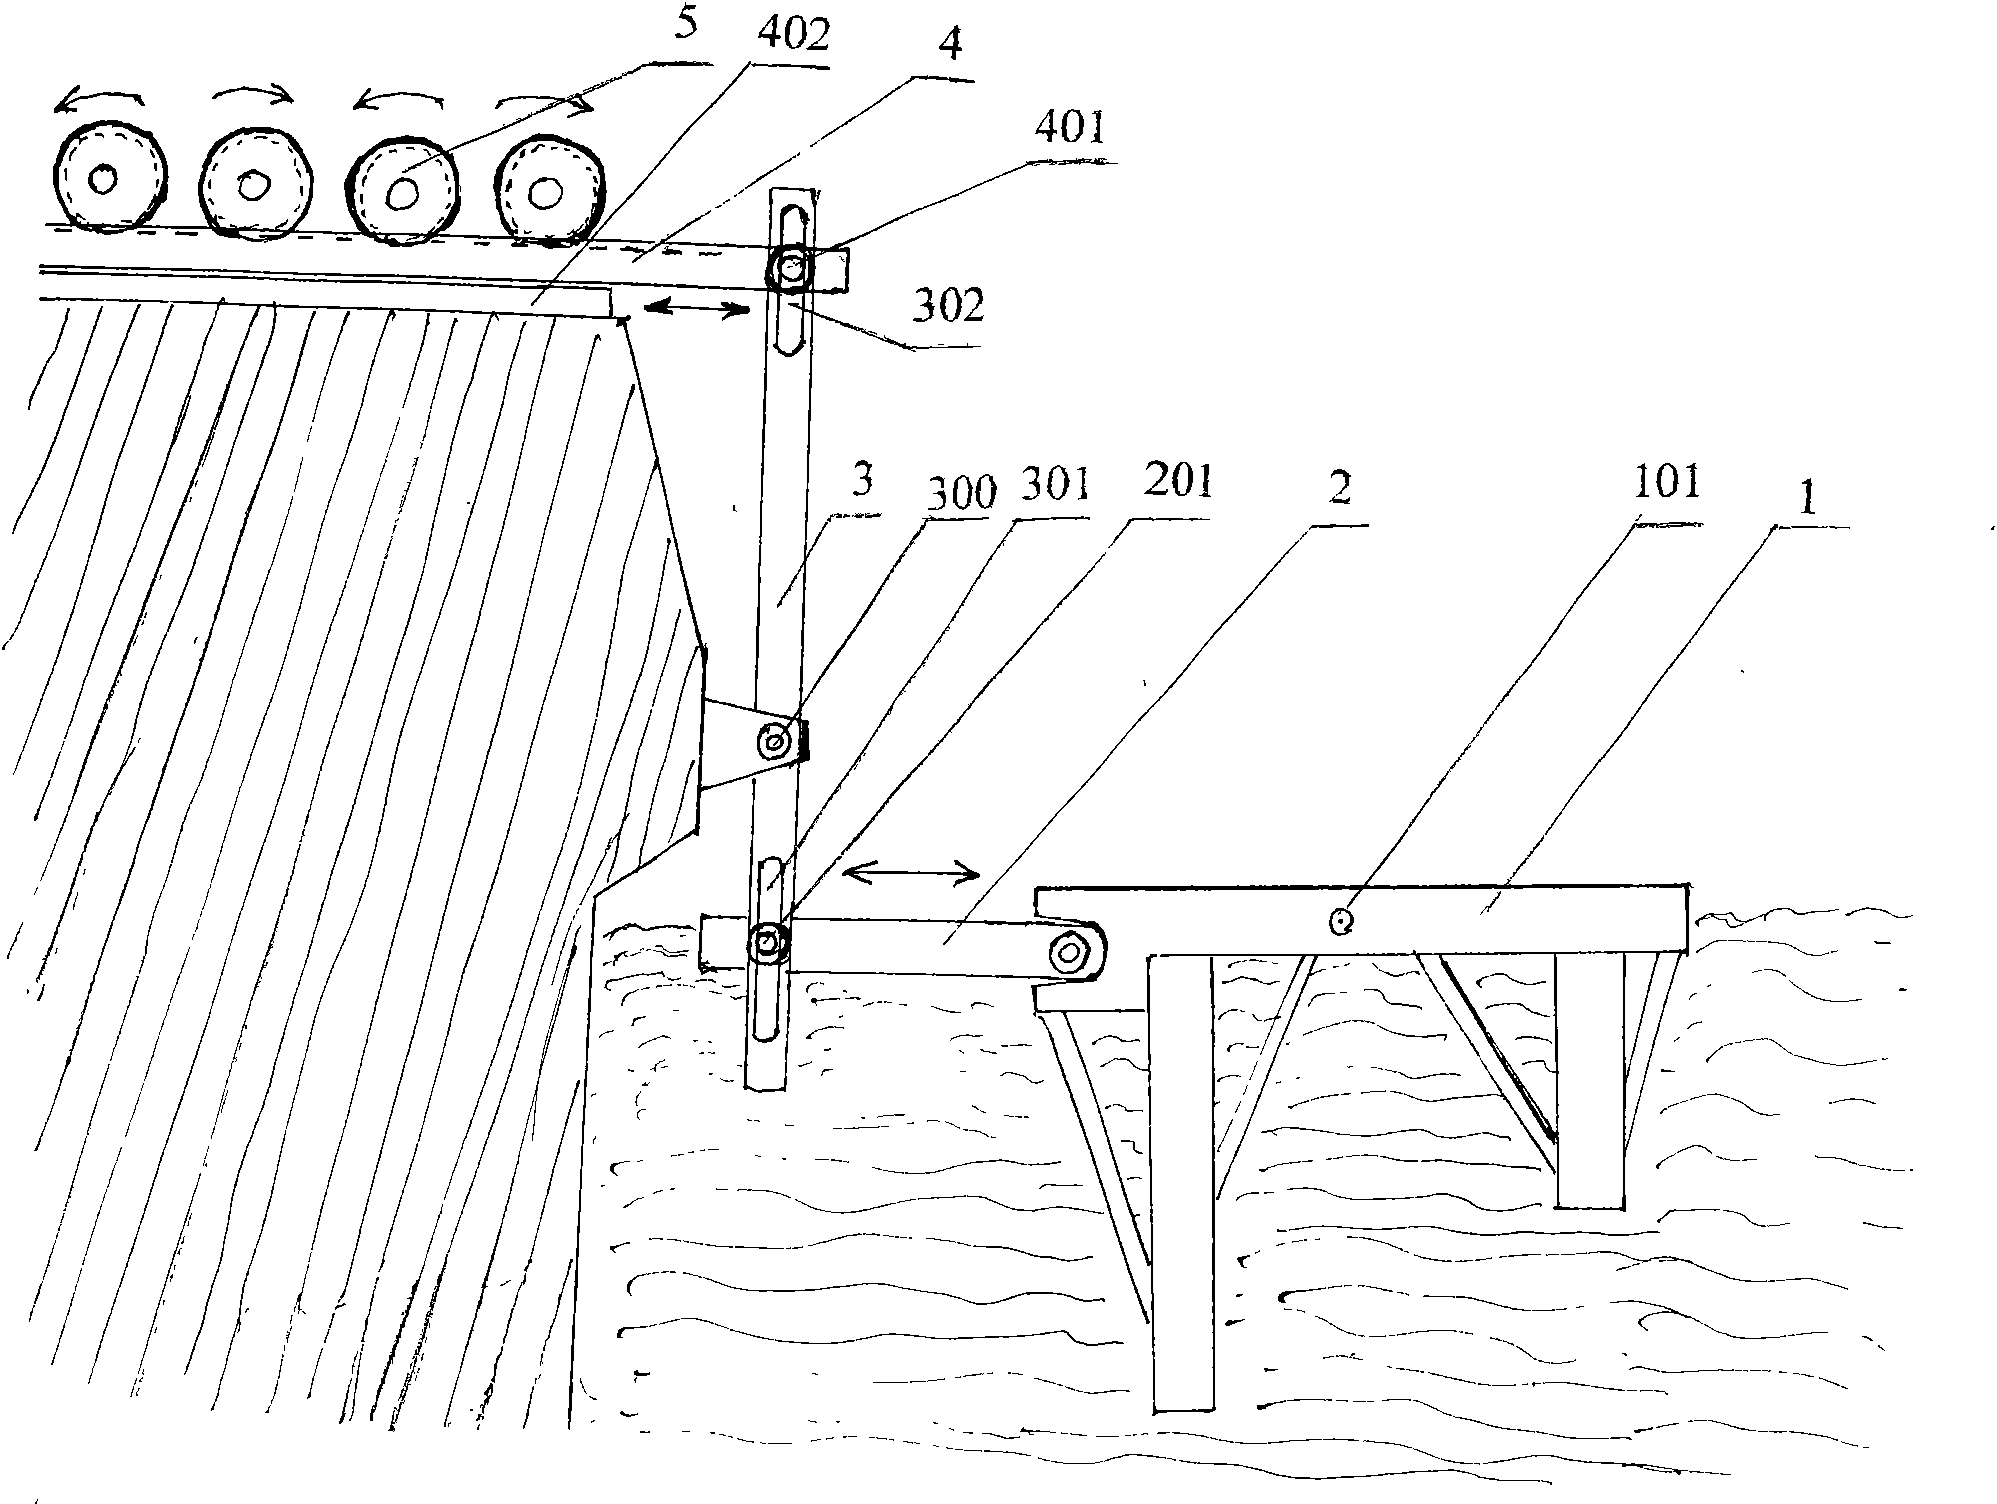 Reciprocating wave power generating device